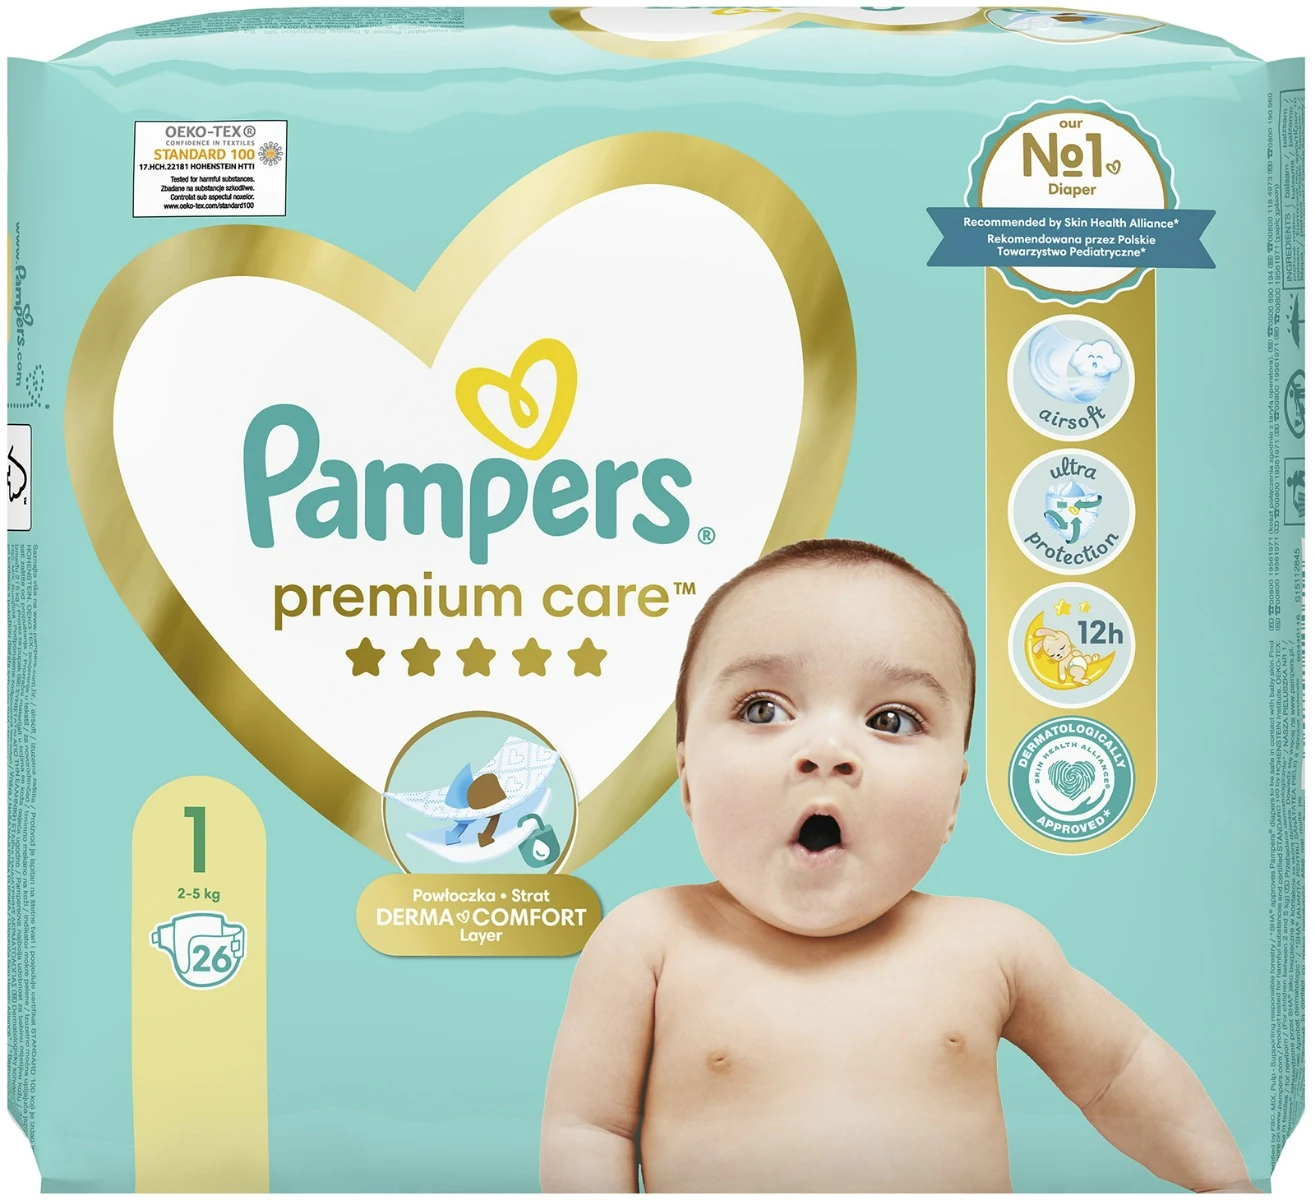 pampers rozmiar 1 a 2